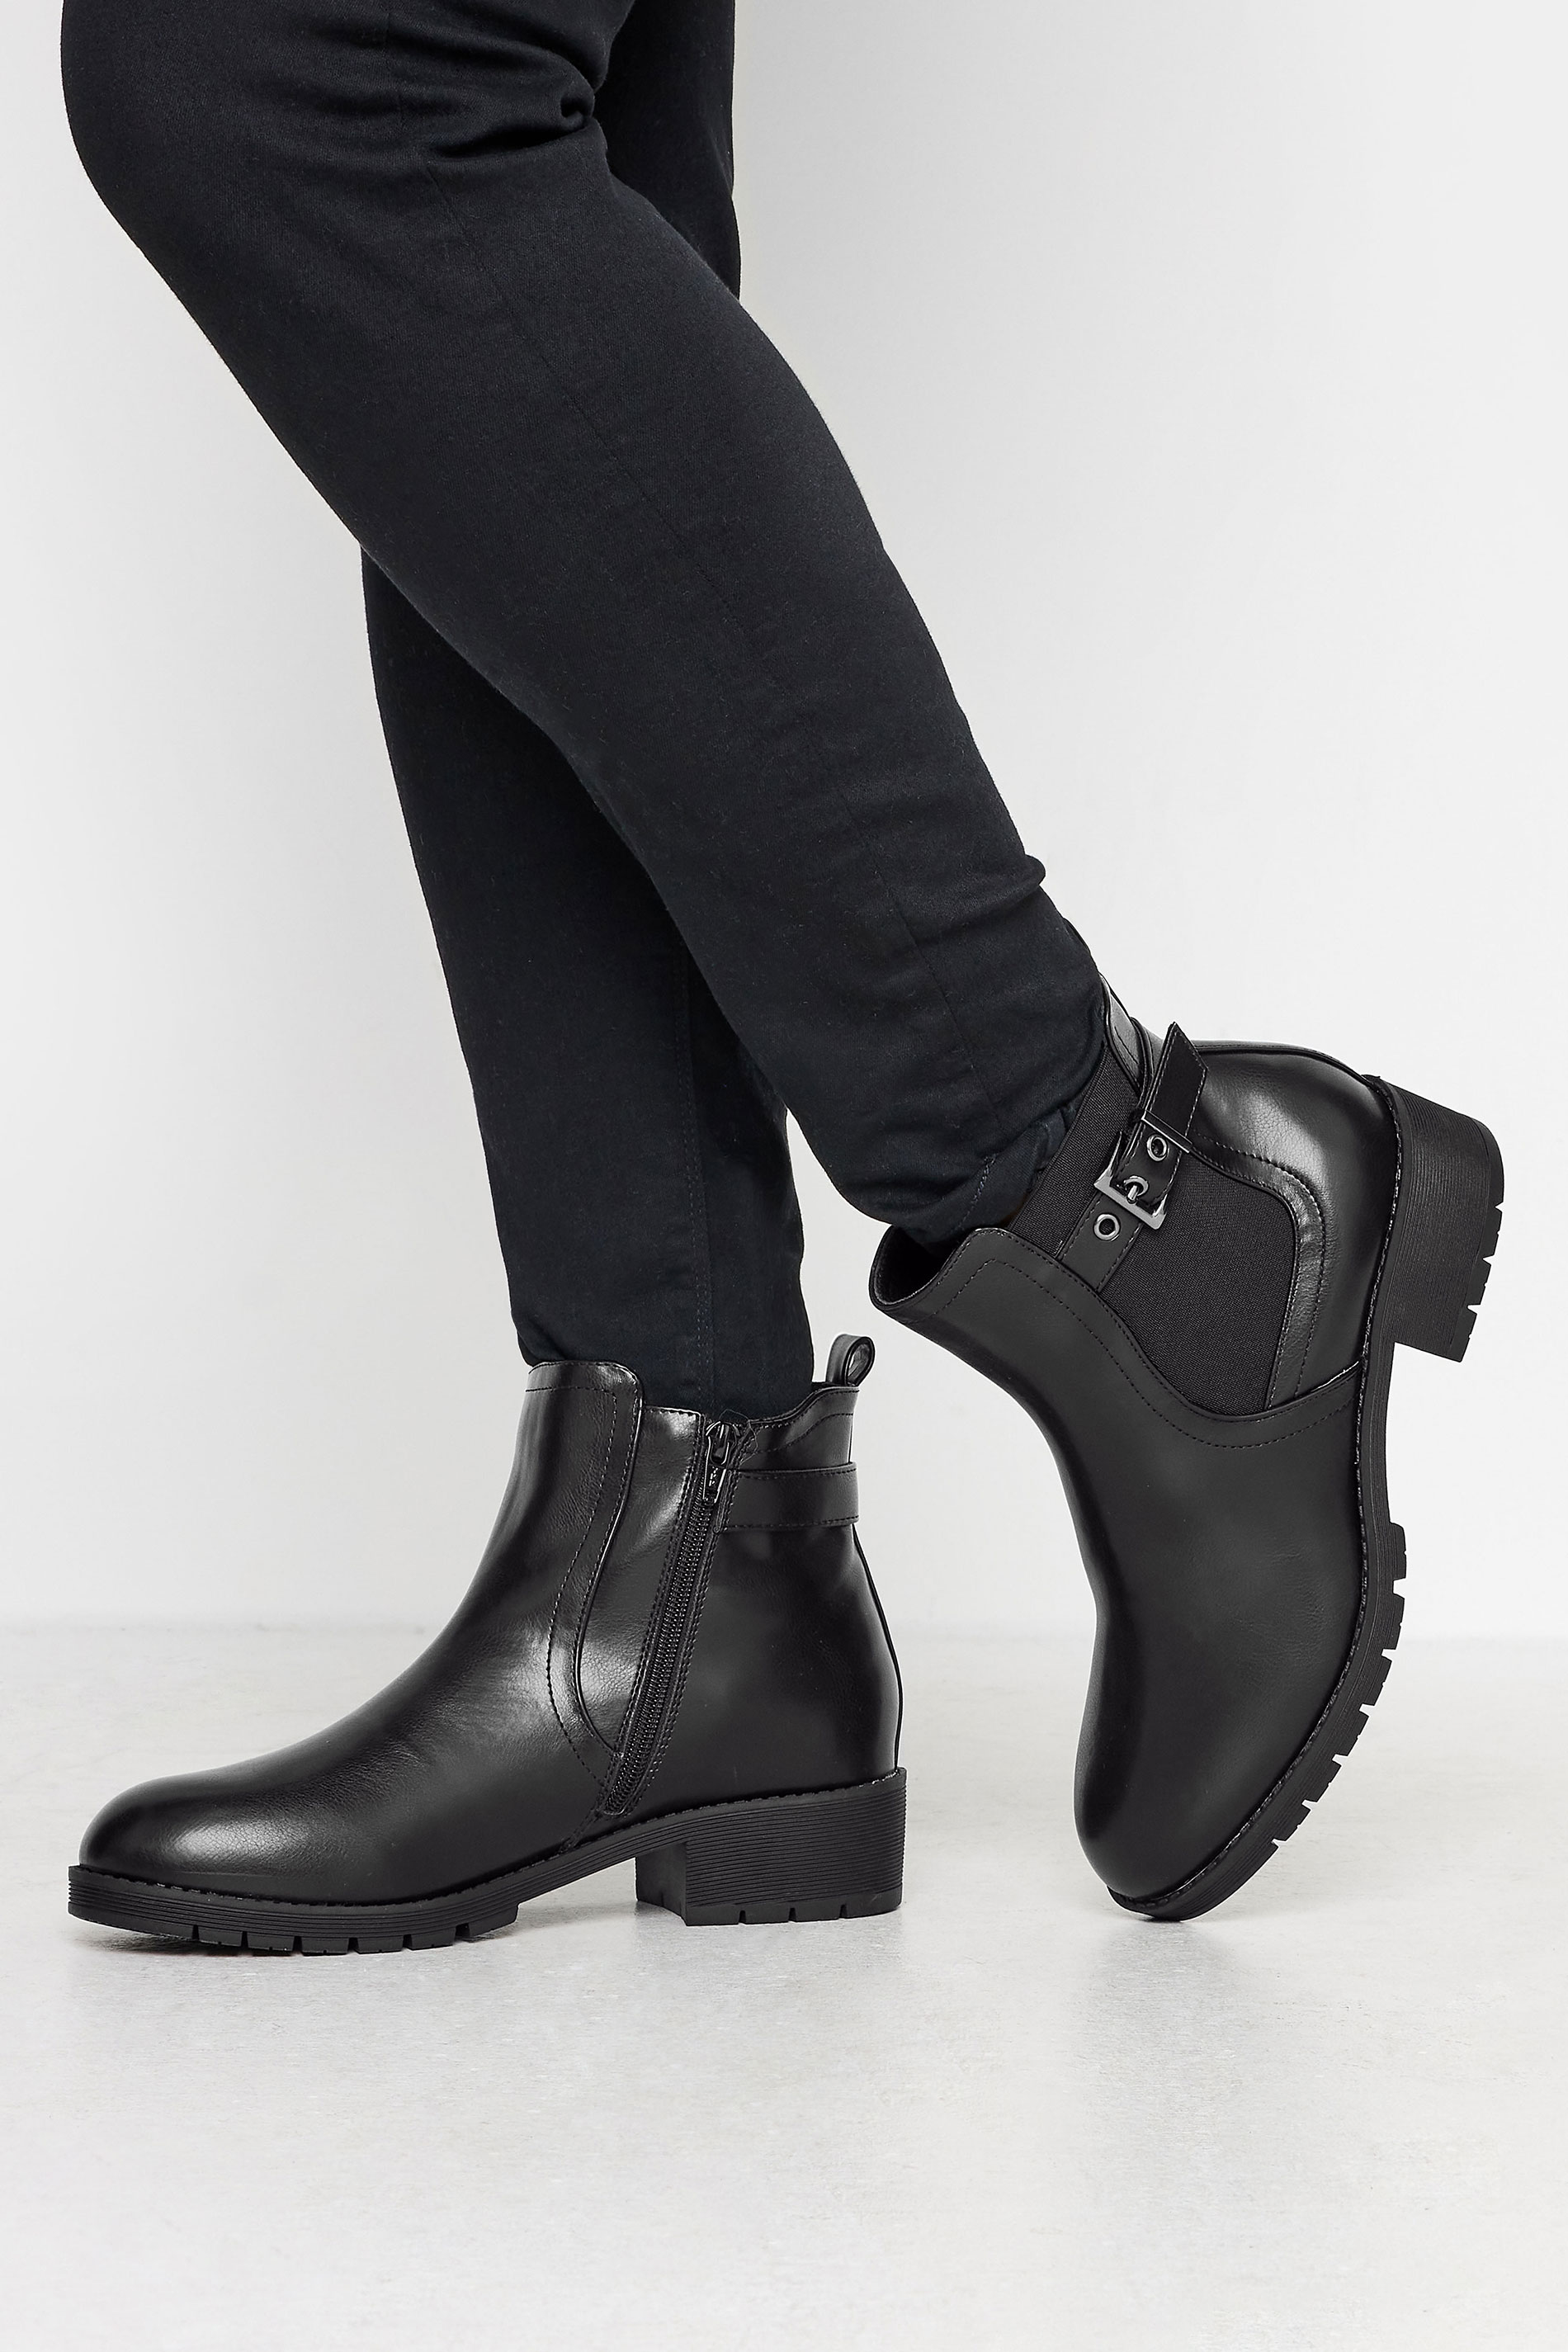 Black Faux Leather Buckle Ankle Boots In Wide E Fit & Extra Wide EEE Fit | Yours Clothing 1